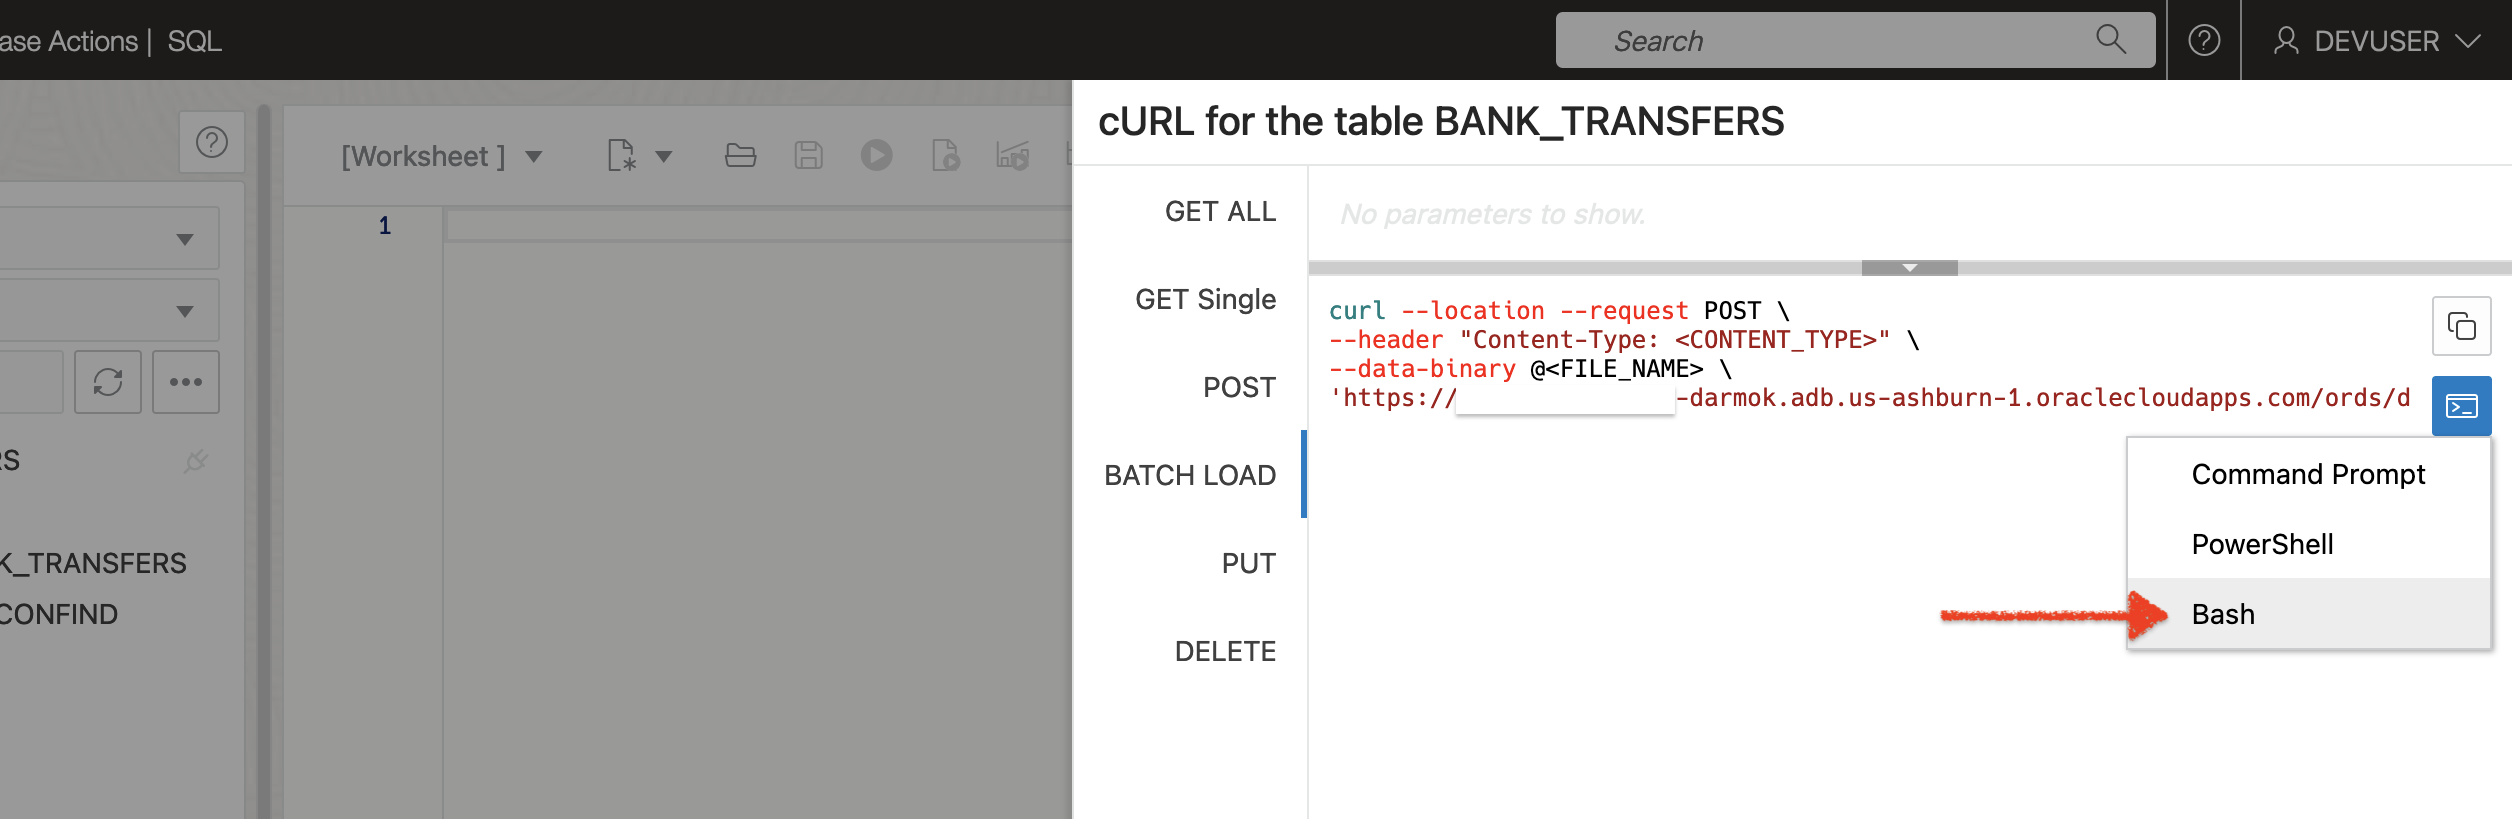 batchload curl command for bank transfers table, chris hoina, senior product manager, ords, oracle rest, database tools, sqlcl, sql developer, oracle rest 